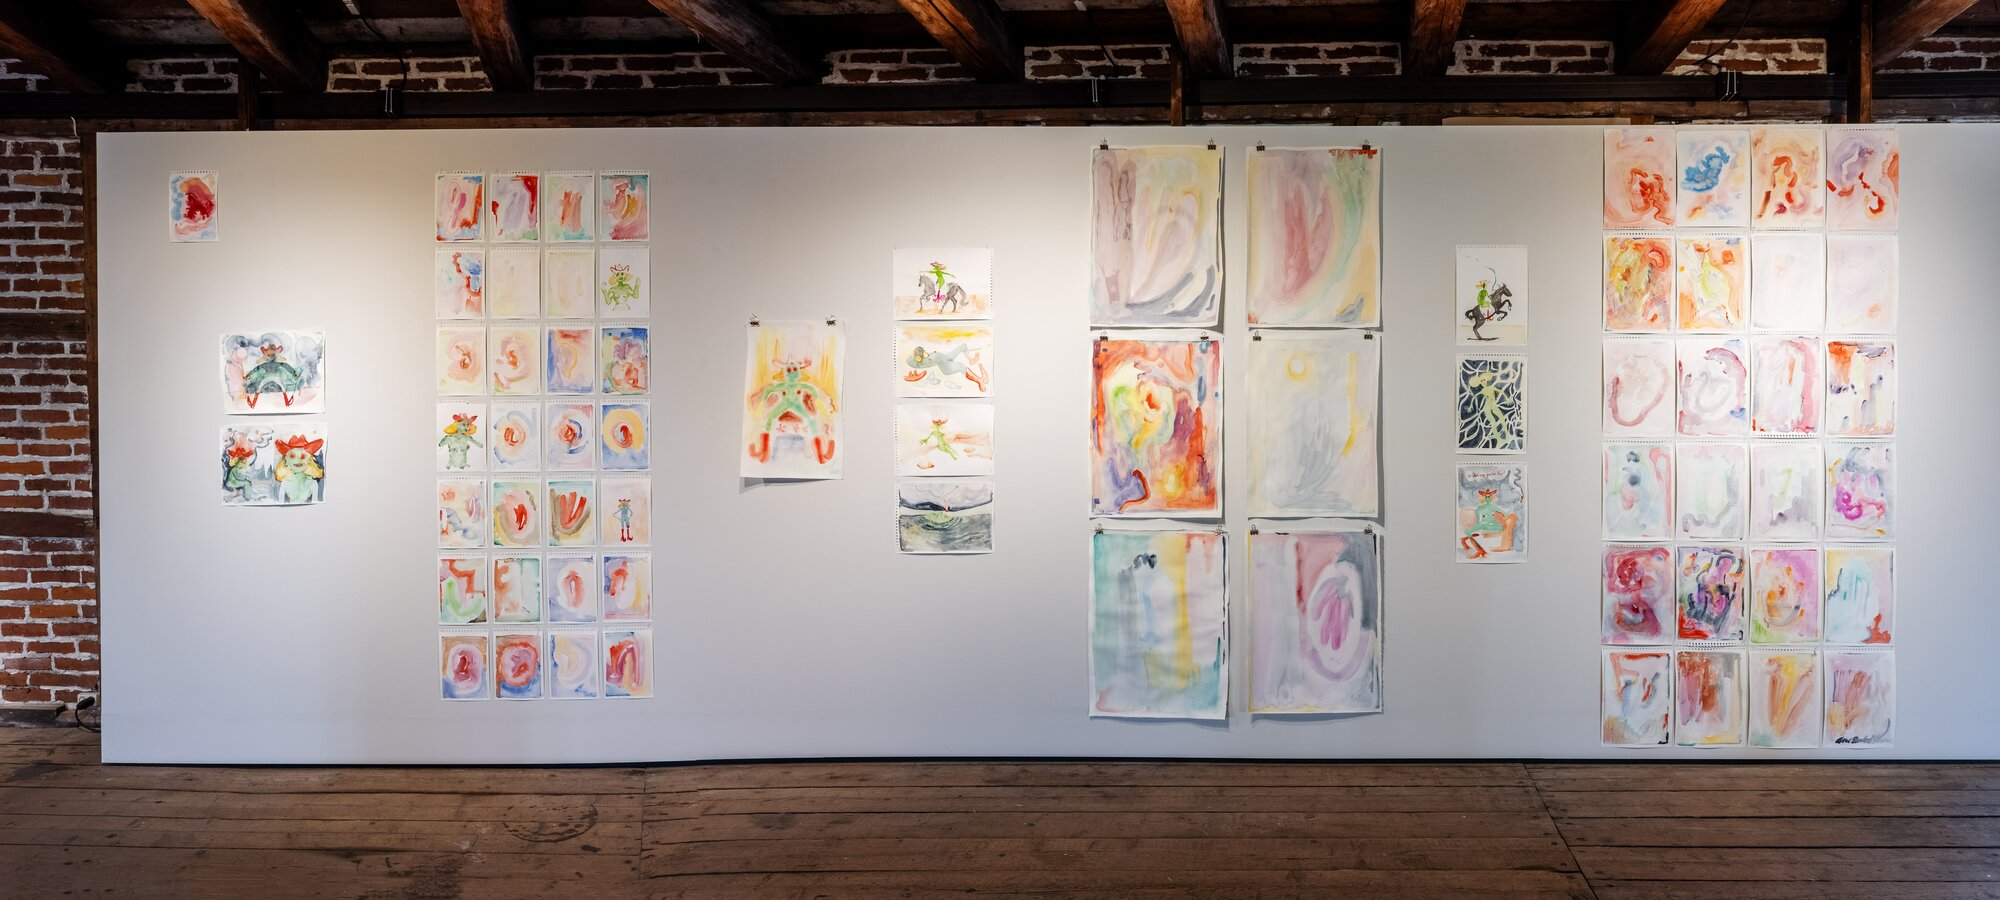 A series of paintings by Ane Barstad Solvang, commissioned by Coast Contemporary during Solvangs residency in advance of Constructing Structures. Photo Jan Khür, Coast Contemporary